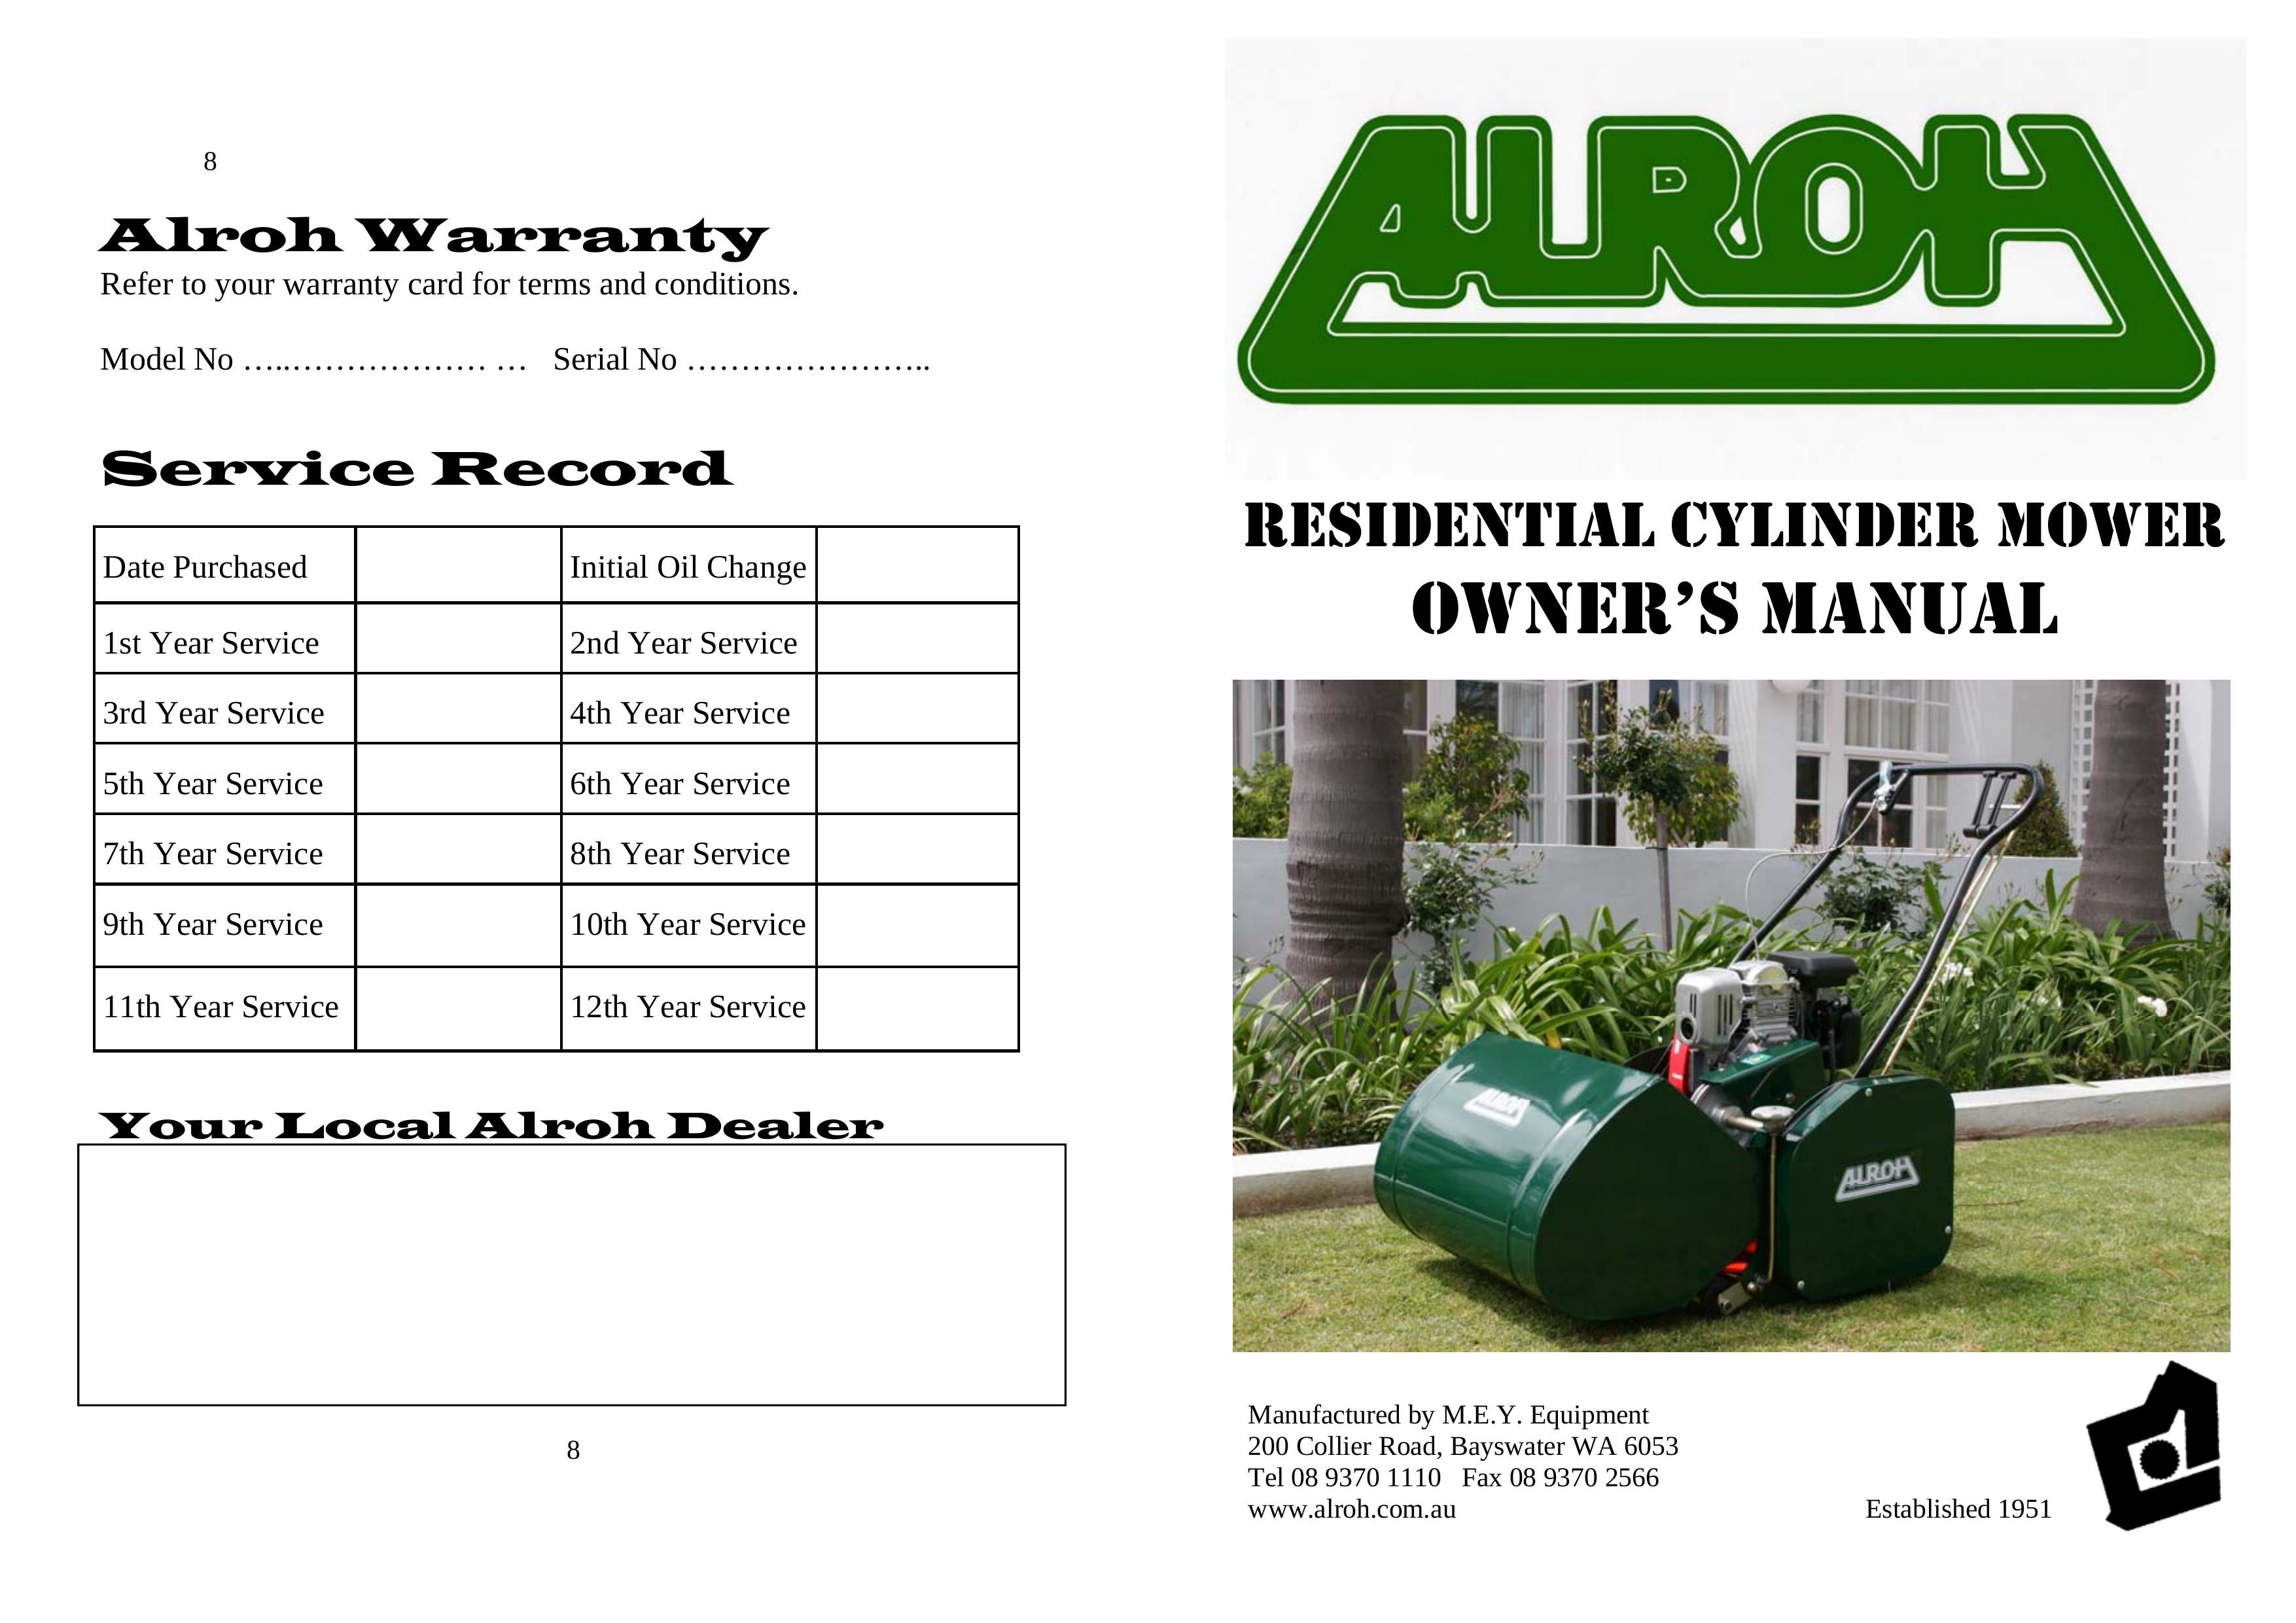 M.E.Y. Equipment Residential Cylinder Mower Lawn Mower User Manual